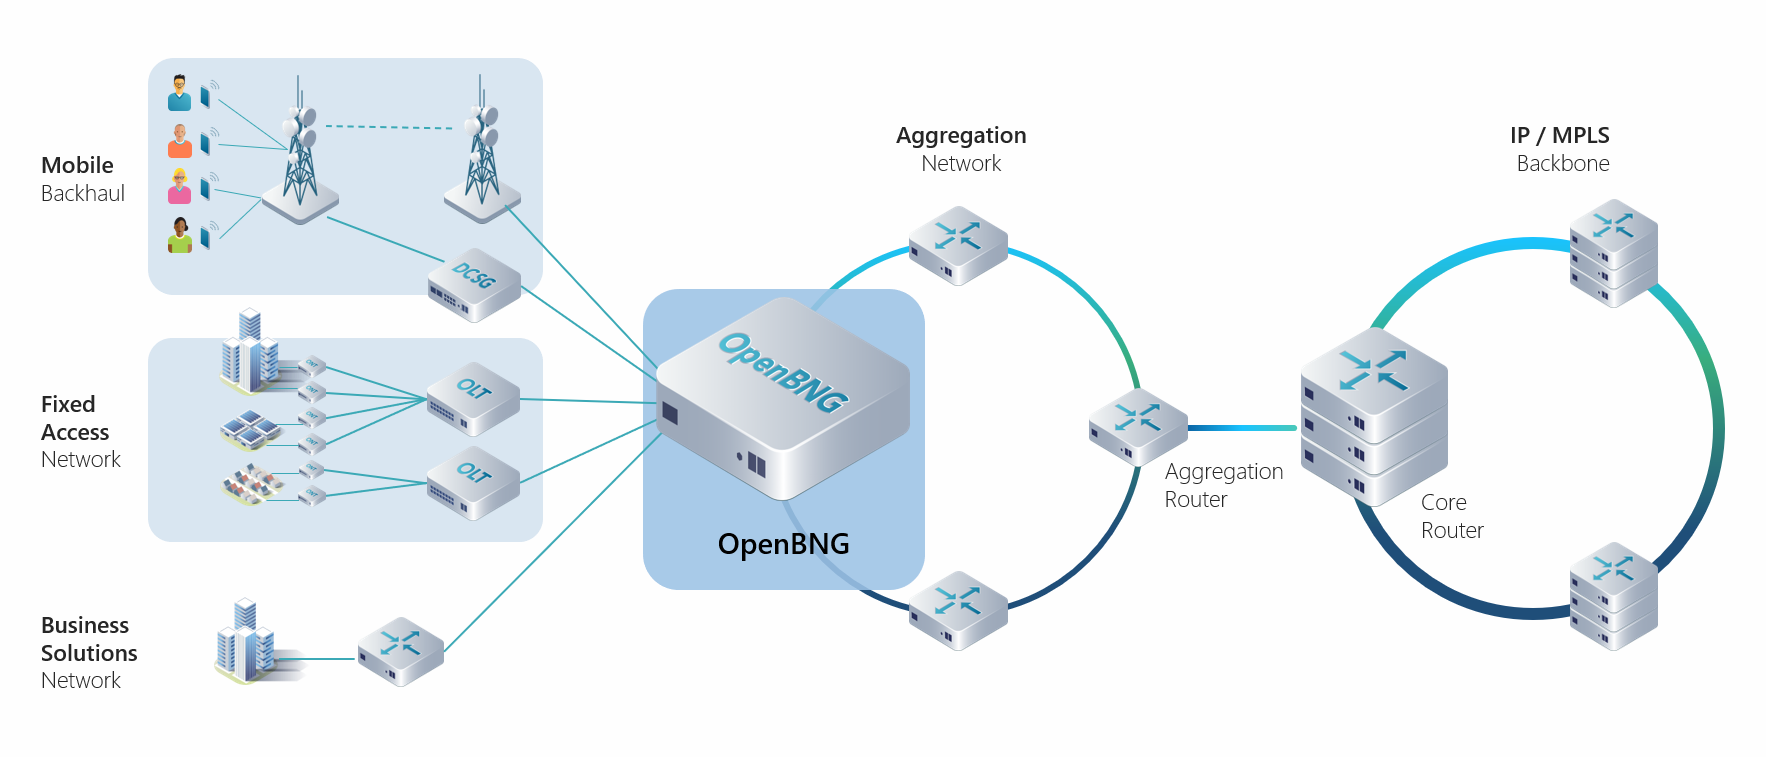 OpenBNG in aggregation network